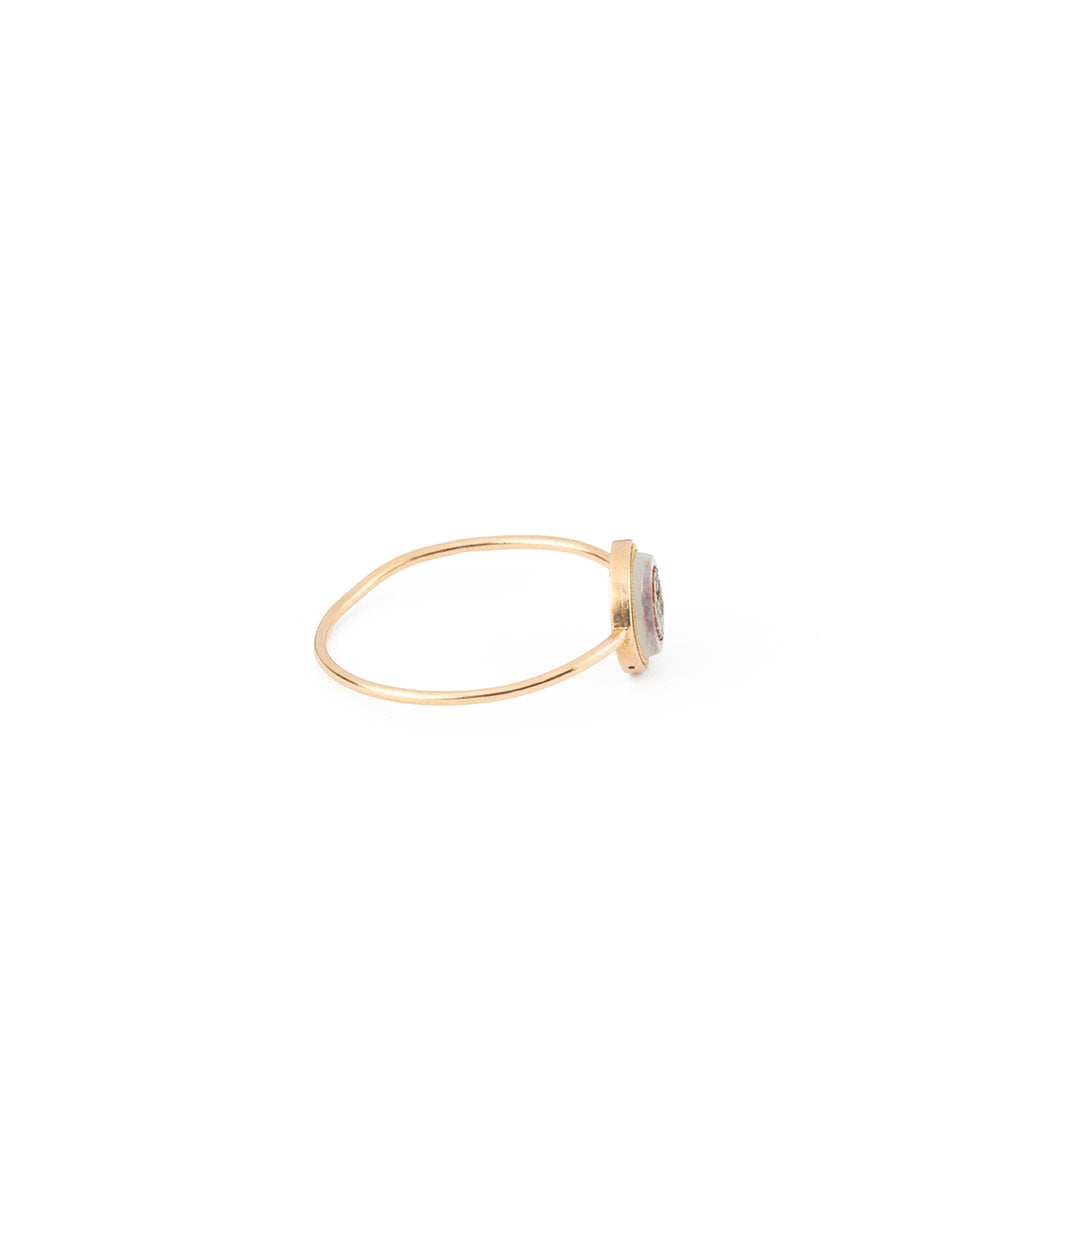 Victorian gold wire ring Kimama - Caillou Paris